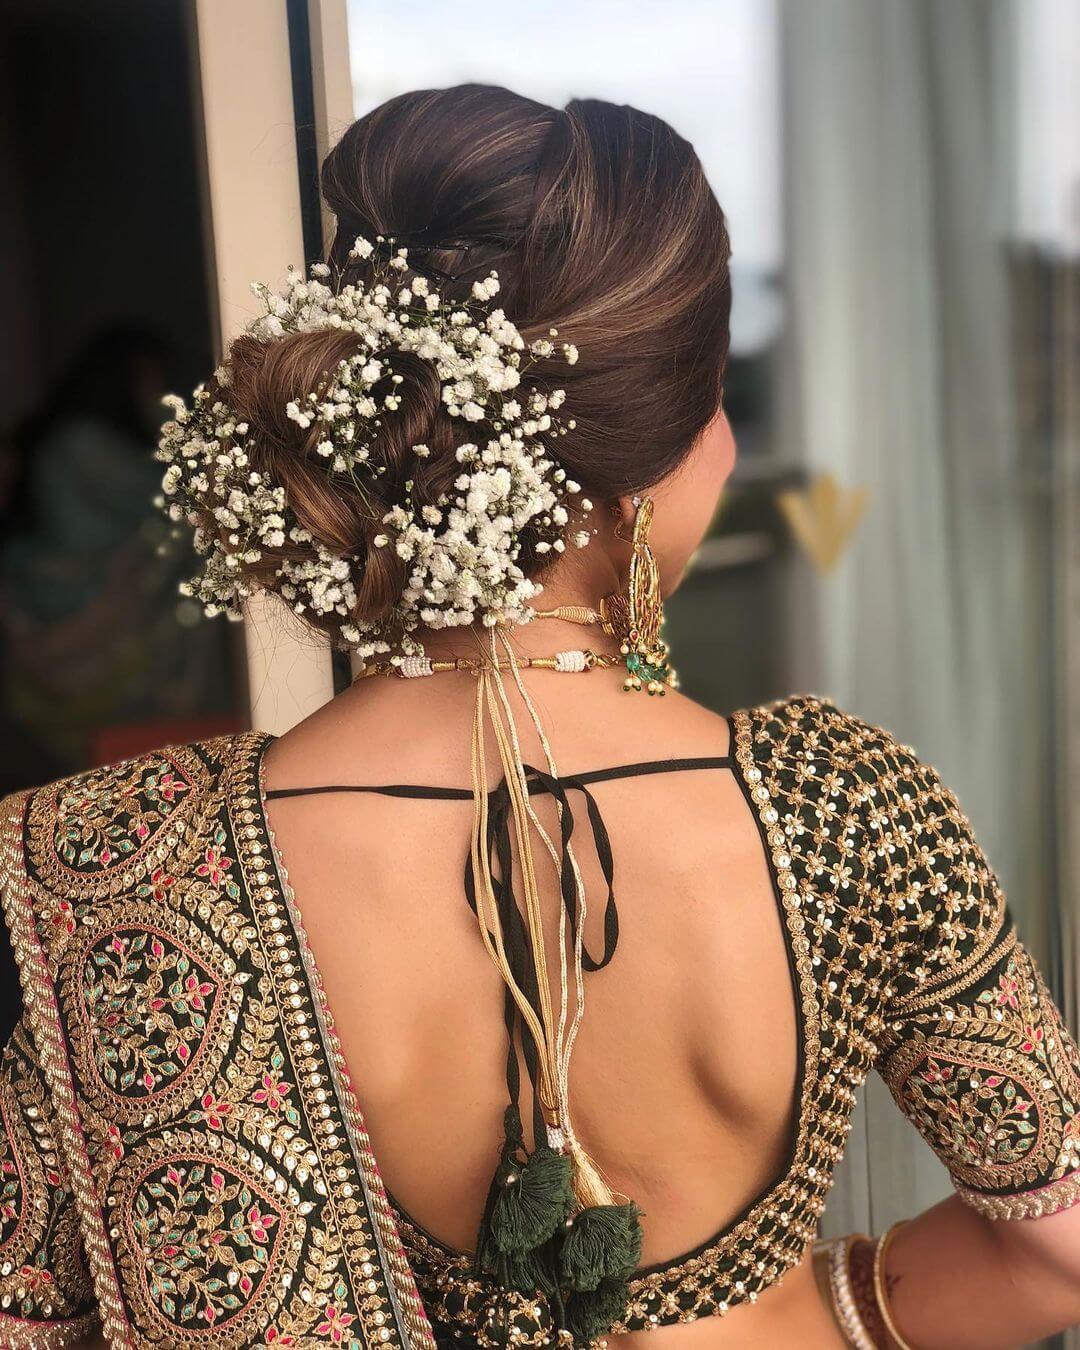 Aesthetic, Gypsos Floral Hairstyle For A Wedding Function